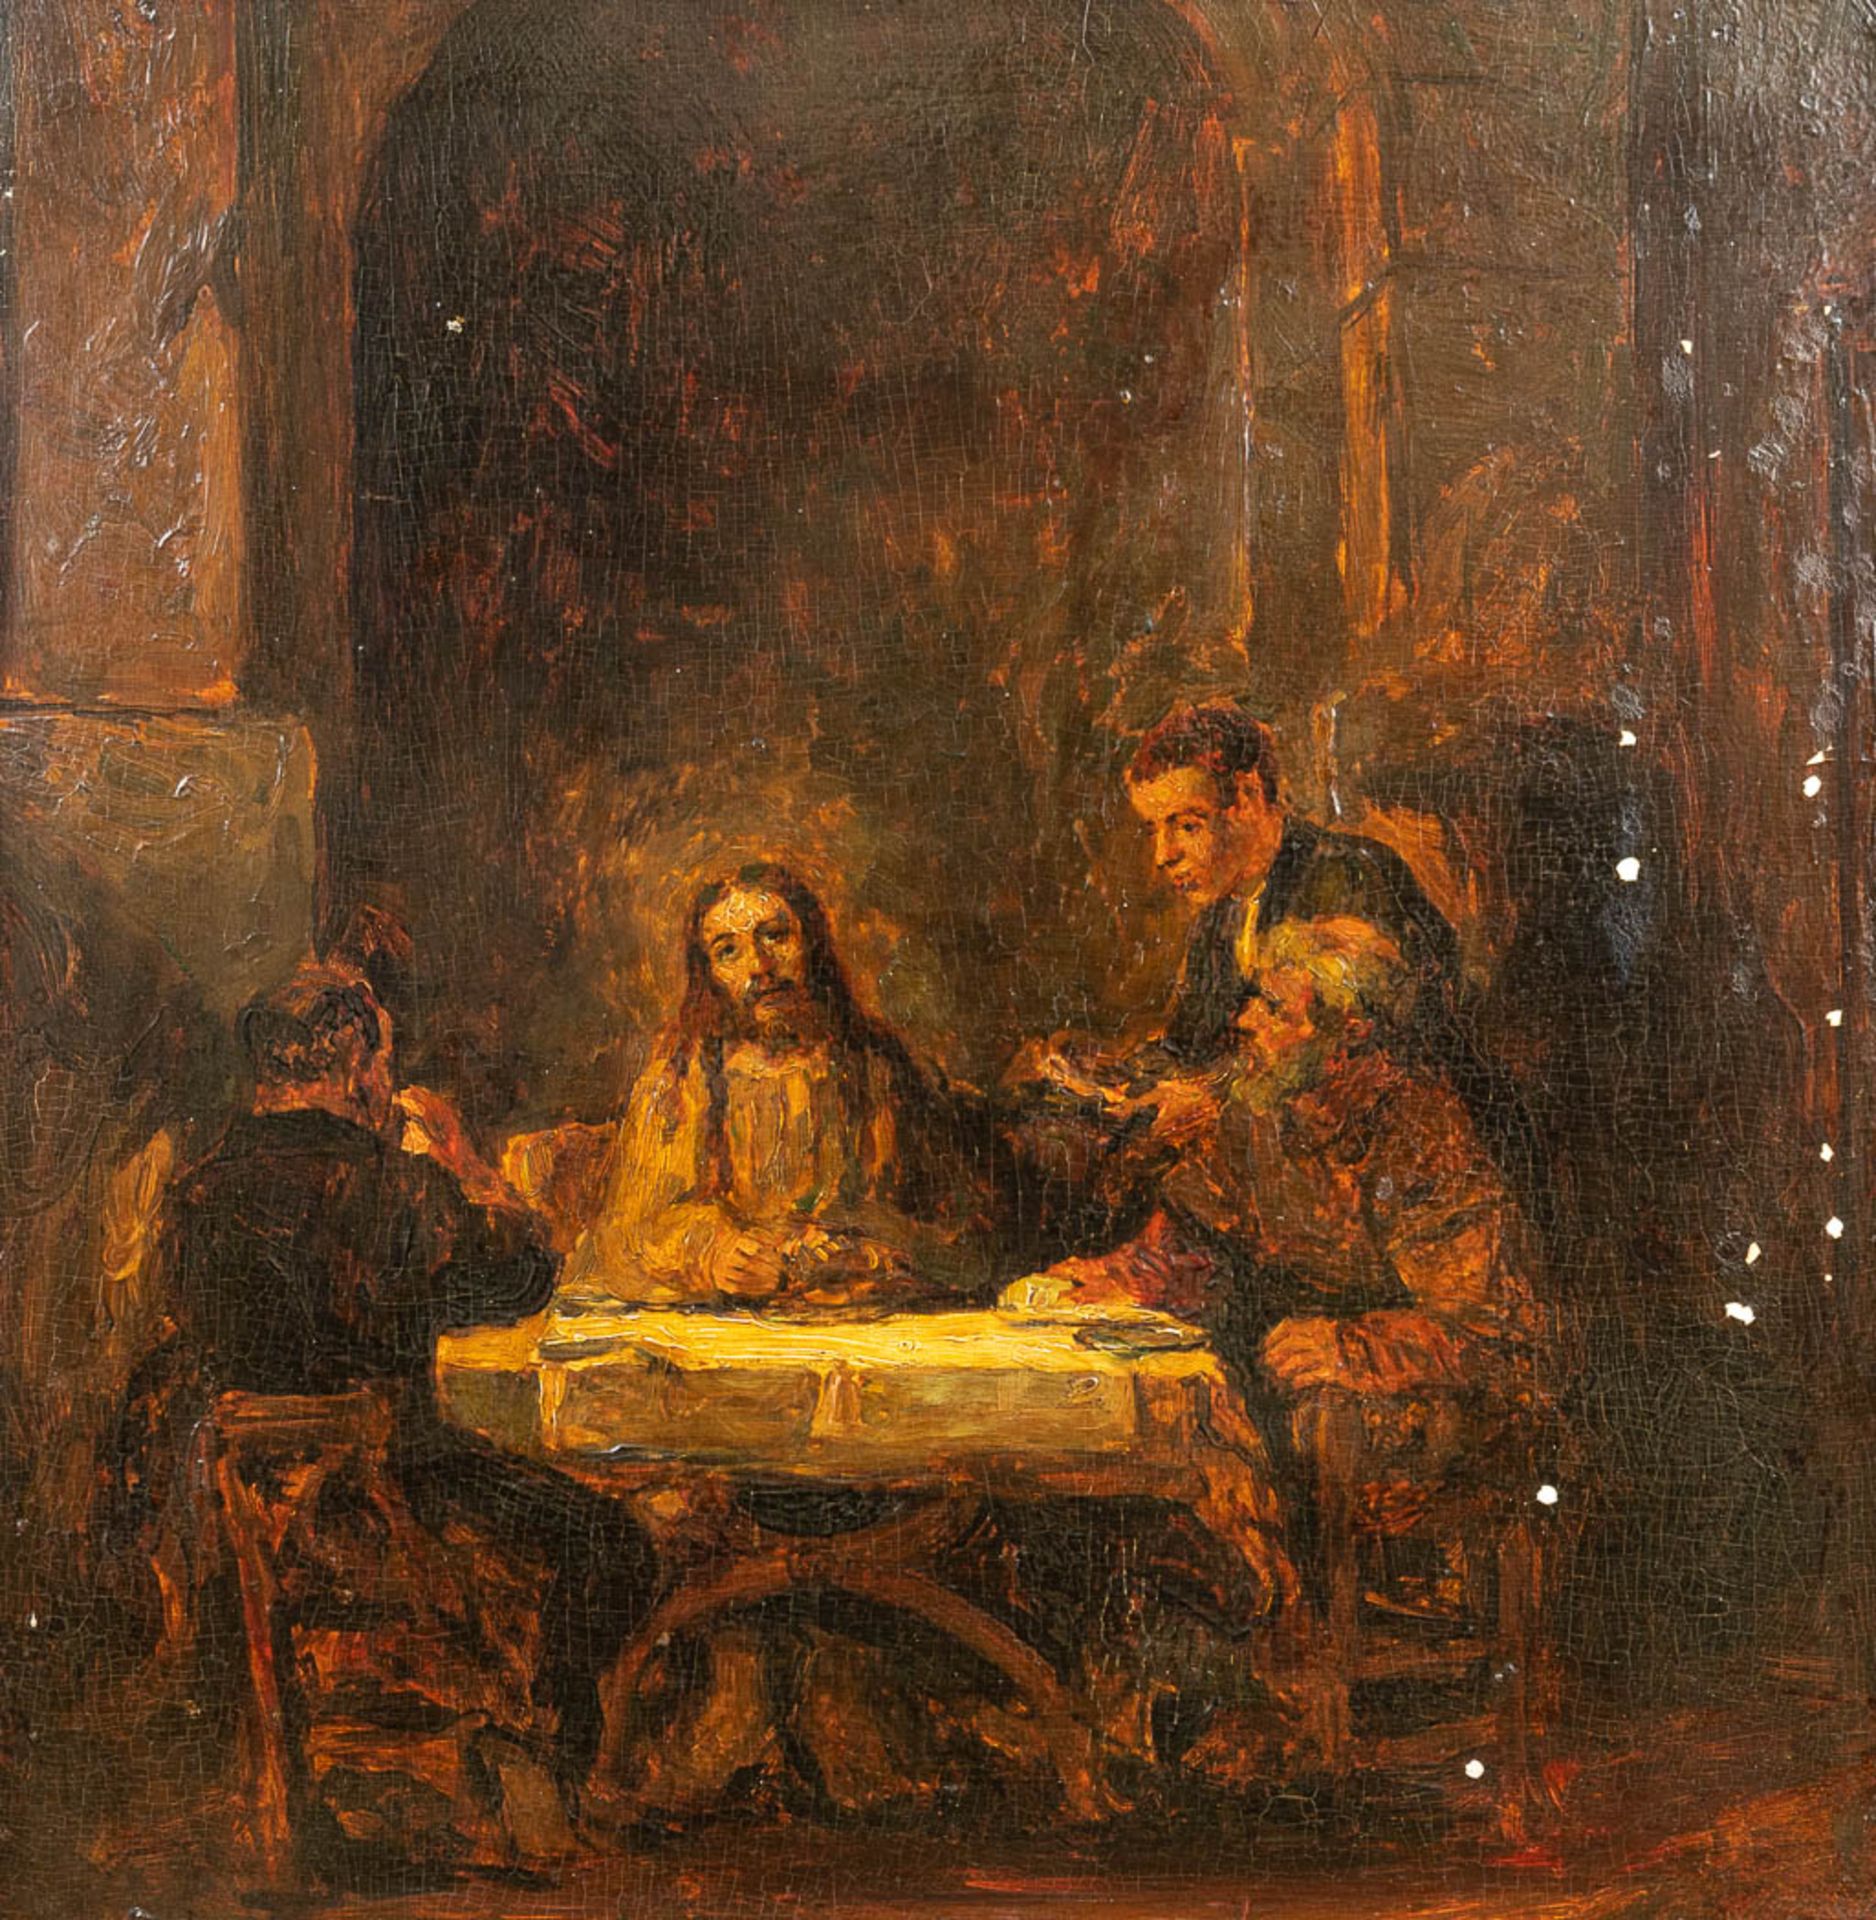 No signature found, 'The Supper at Emmaus' a painting, oil on panel. After Rembrandt Van Rijn